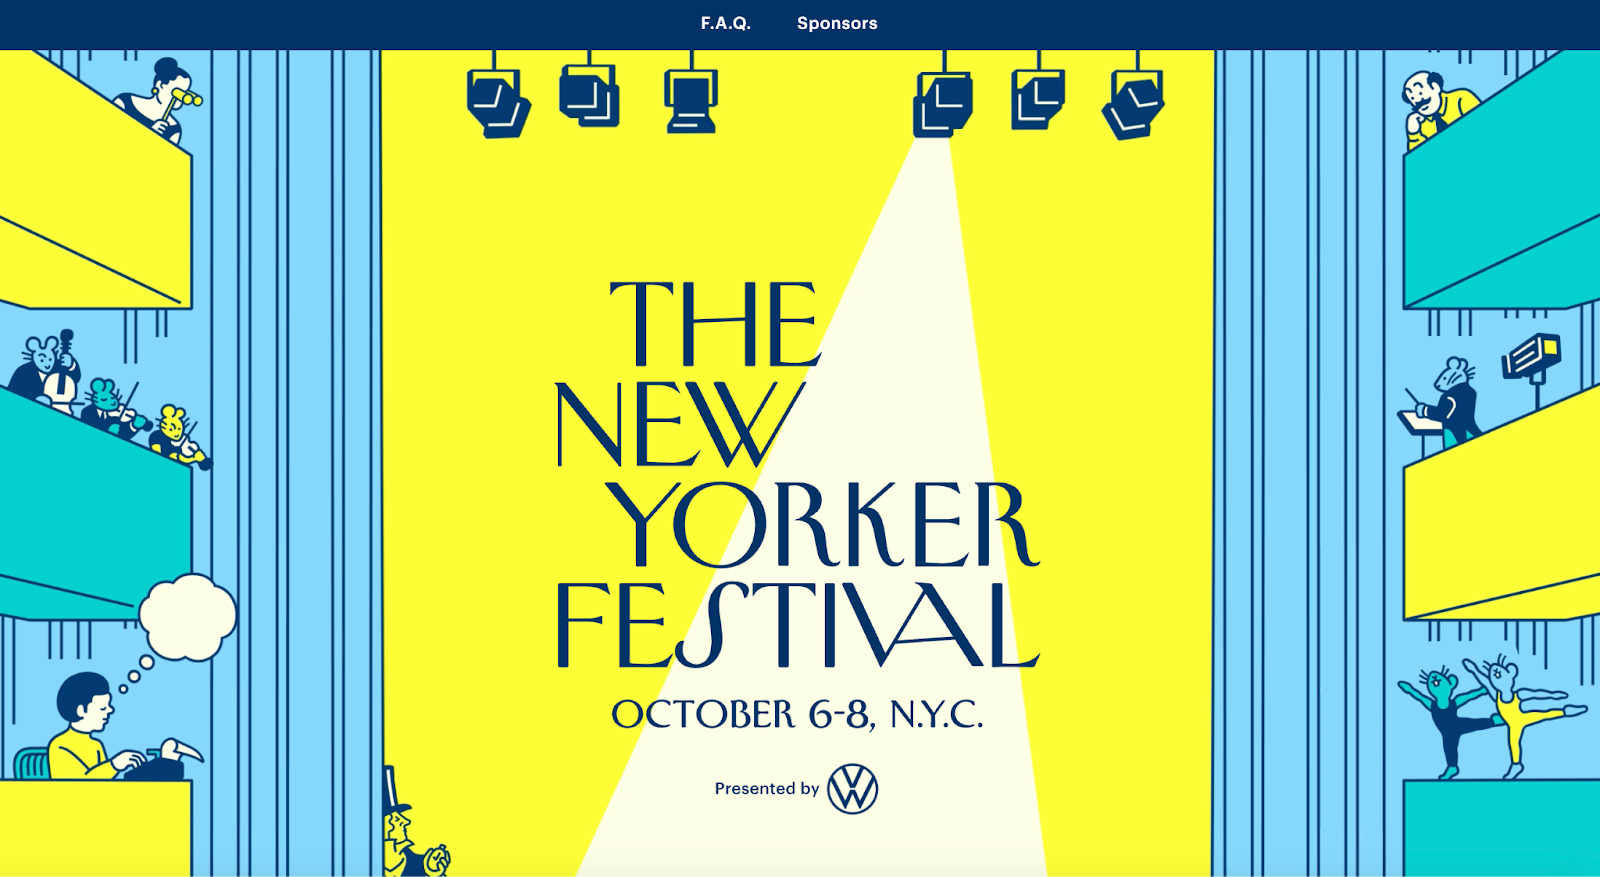 event website examples, the new yorker festival